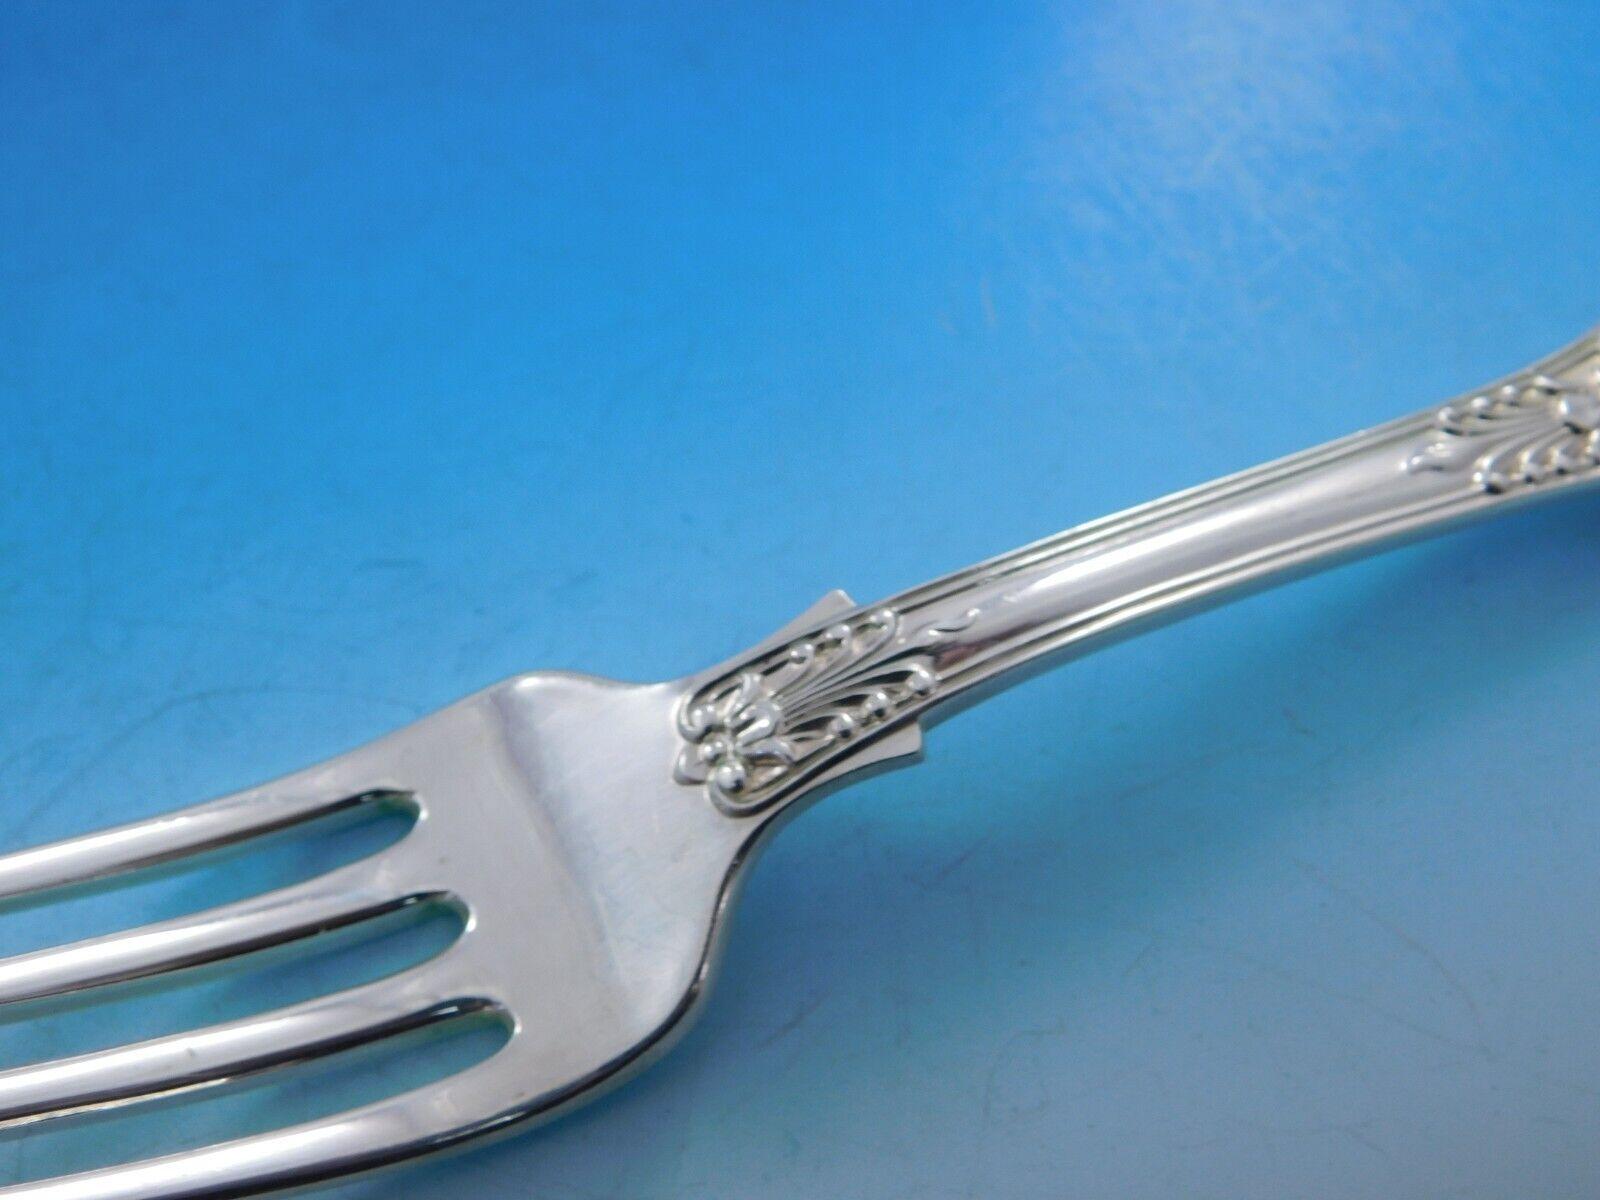 ENGLISH KING (c. 1885)

Patterns similar to our English King were first used in France and England late in the eighteenth century and have remained among the most popular styles for>flatware today, in both Europe and America. Tiffany & Co. first